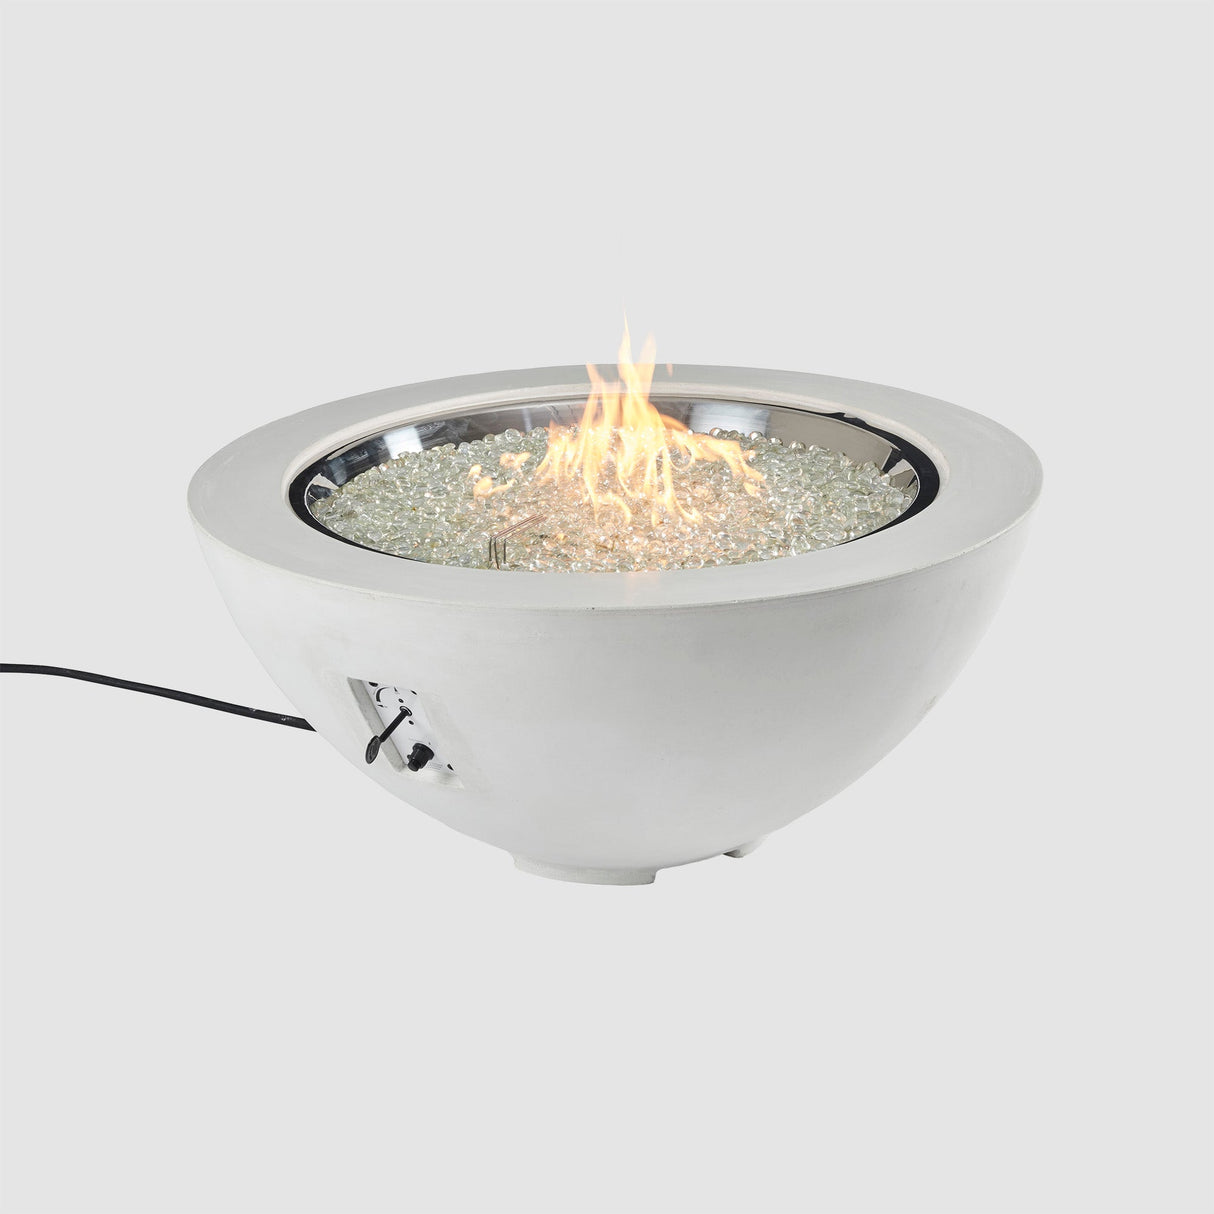 Cove Round Gas Fire Pit Bowl 42"